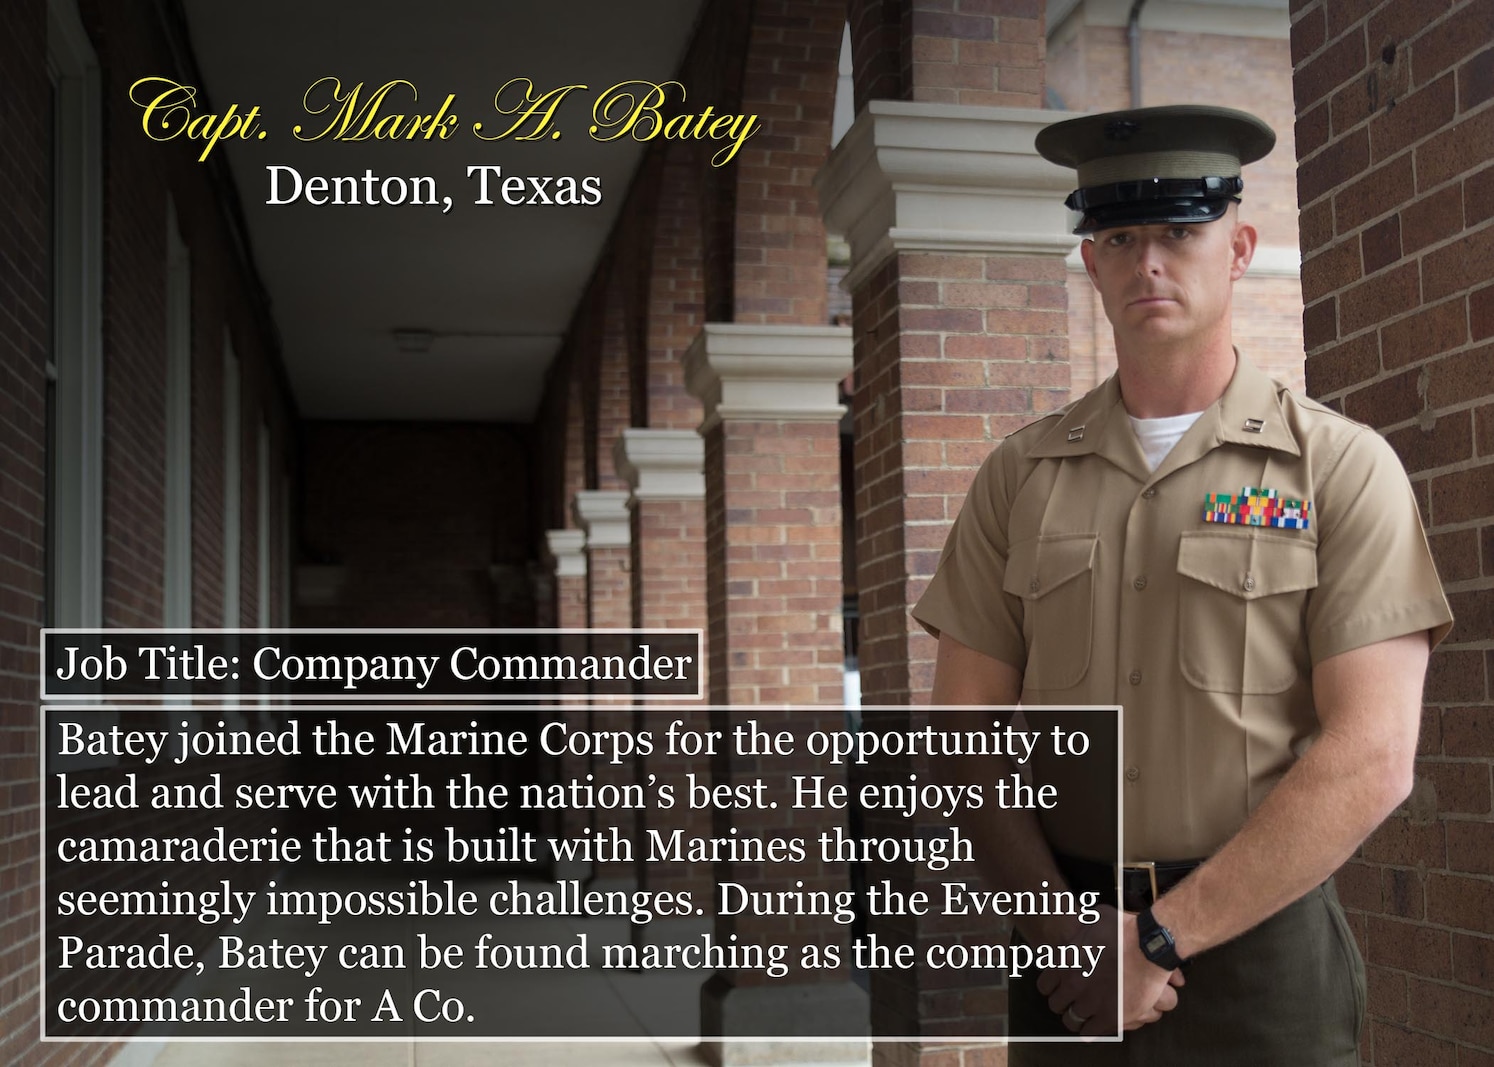 Capt. Mark A. Batey
Denton, Texas
Job Title: Company Commander
Batey joined the Marine Corps for the opportunity to lead and serve with the nation’s best. He enjoys the camaraderie that is built with Marines through seemingly impossible challenges. During the Evening Parade, Batey can be found marching as the company commander for A Co.
(Official Marine Corps graphic by Cpl. Chi Nguyen/Released)